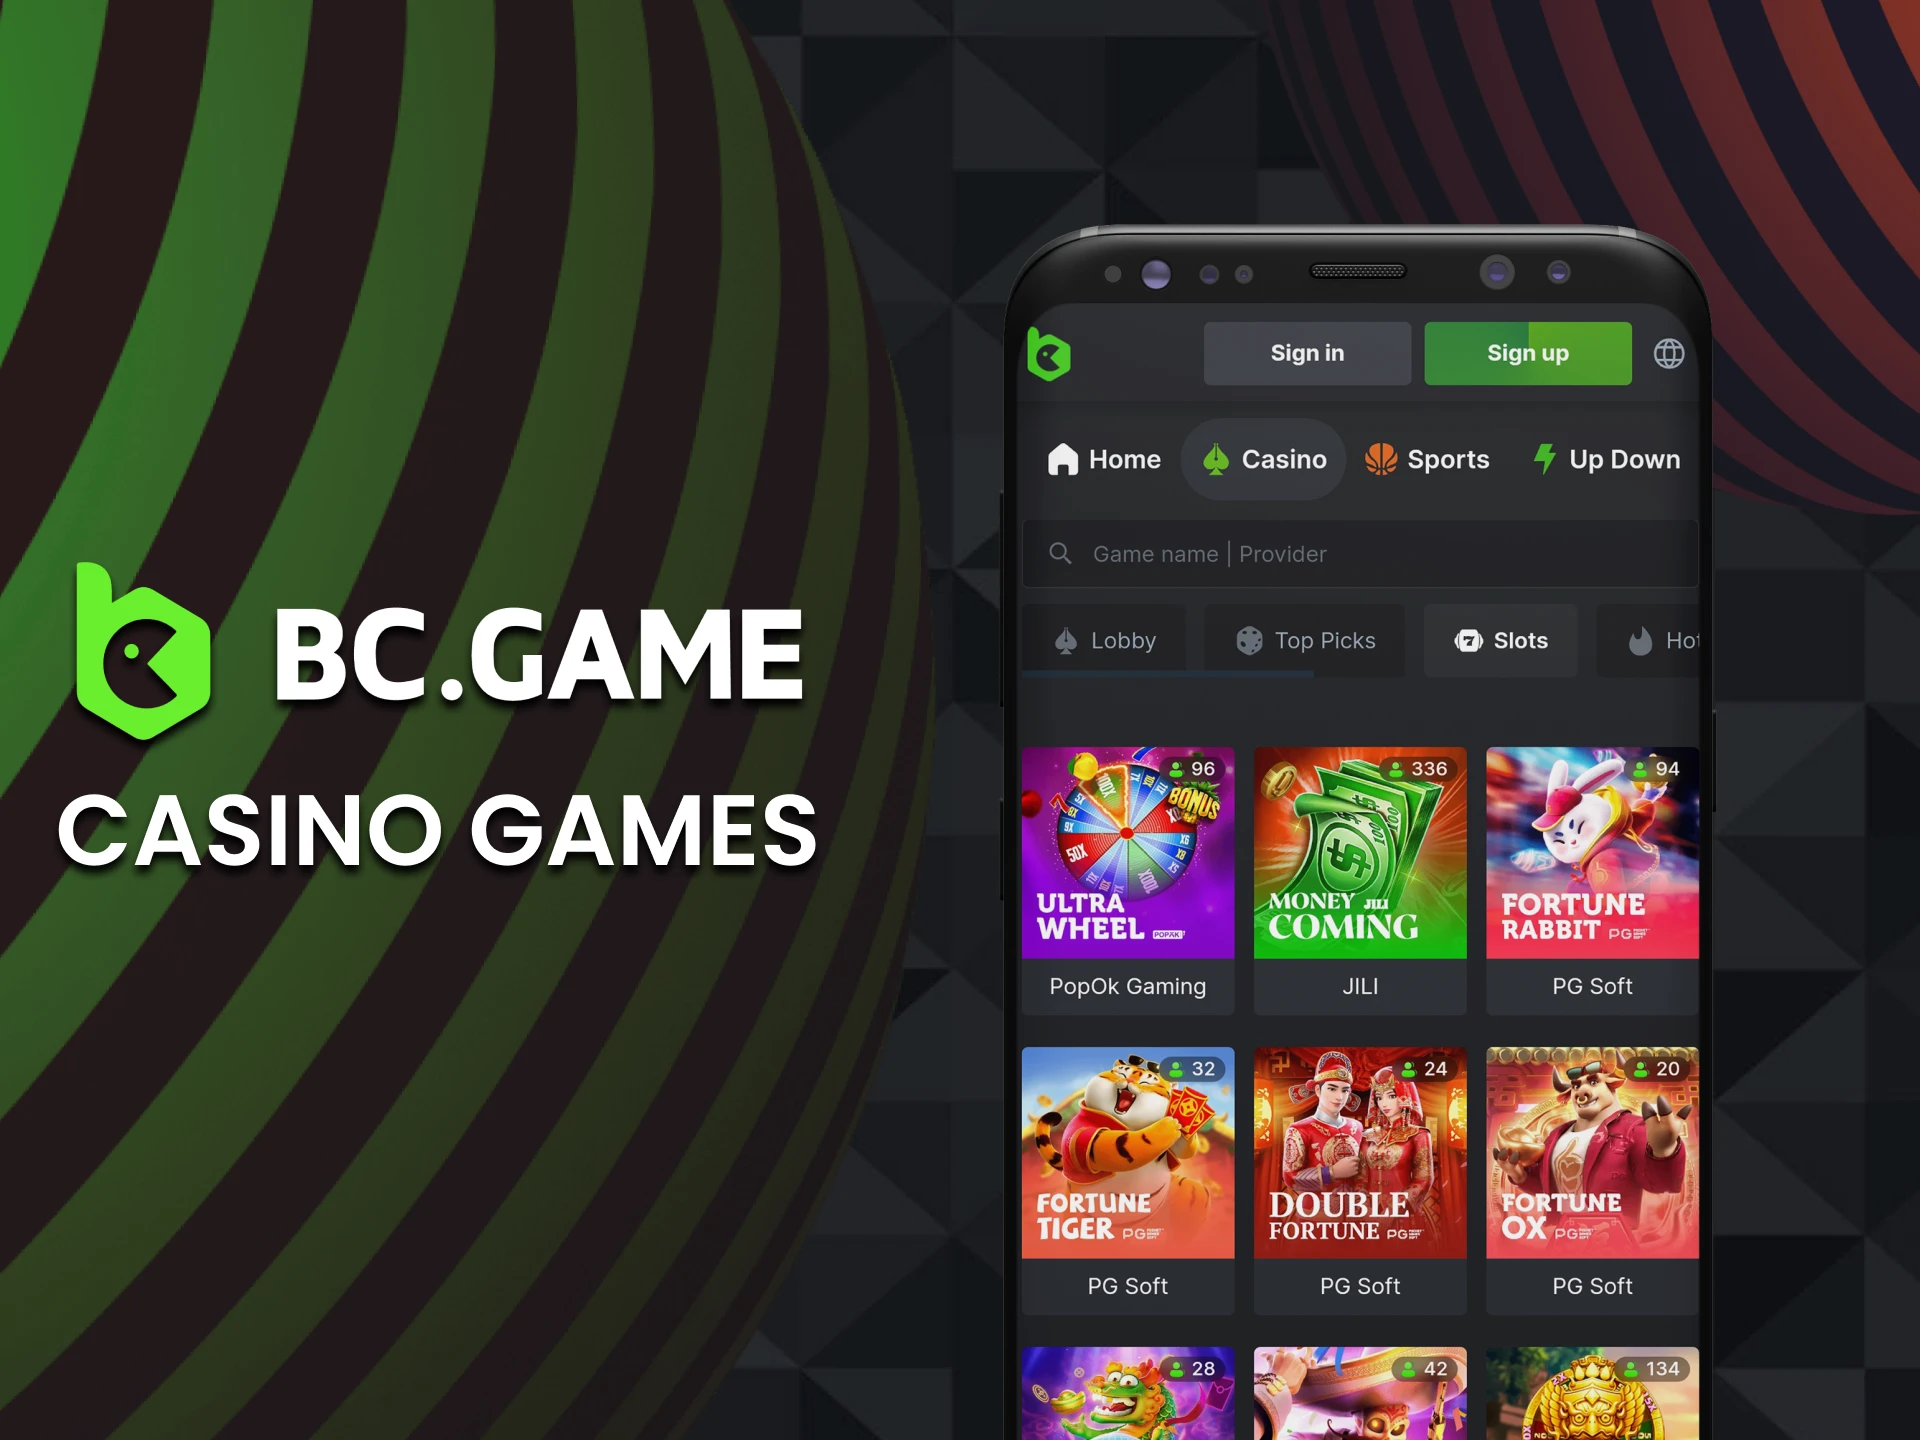 BC Game app has an extensive collection of casino games.